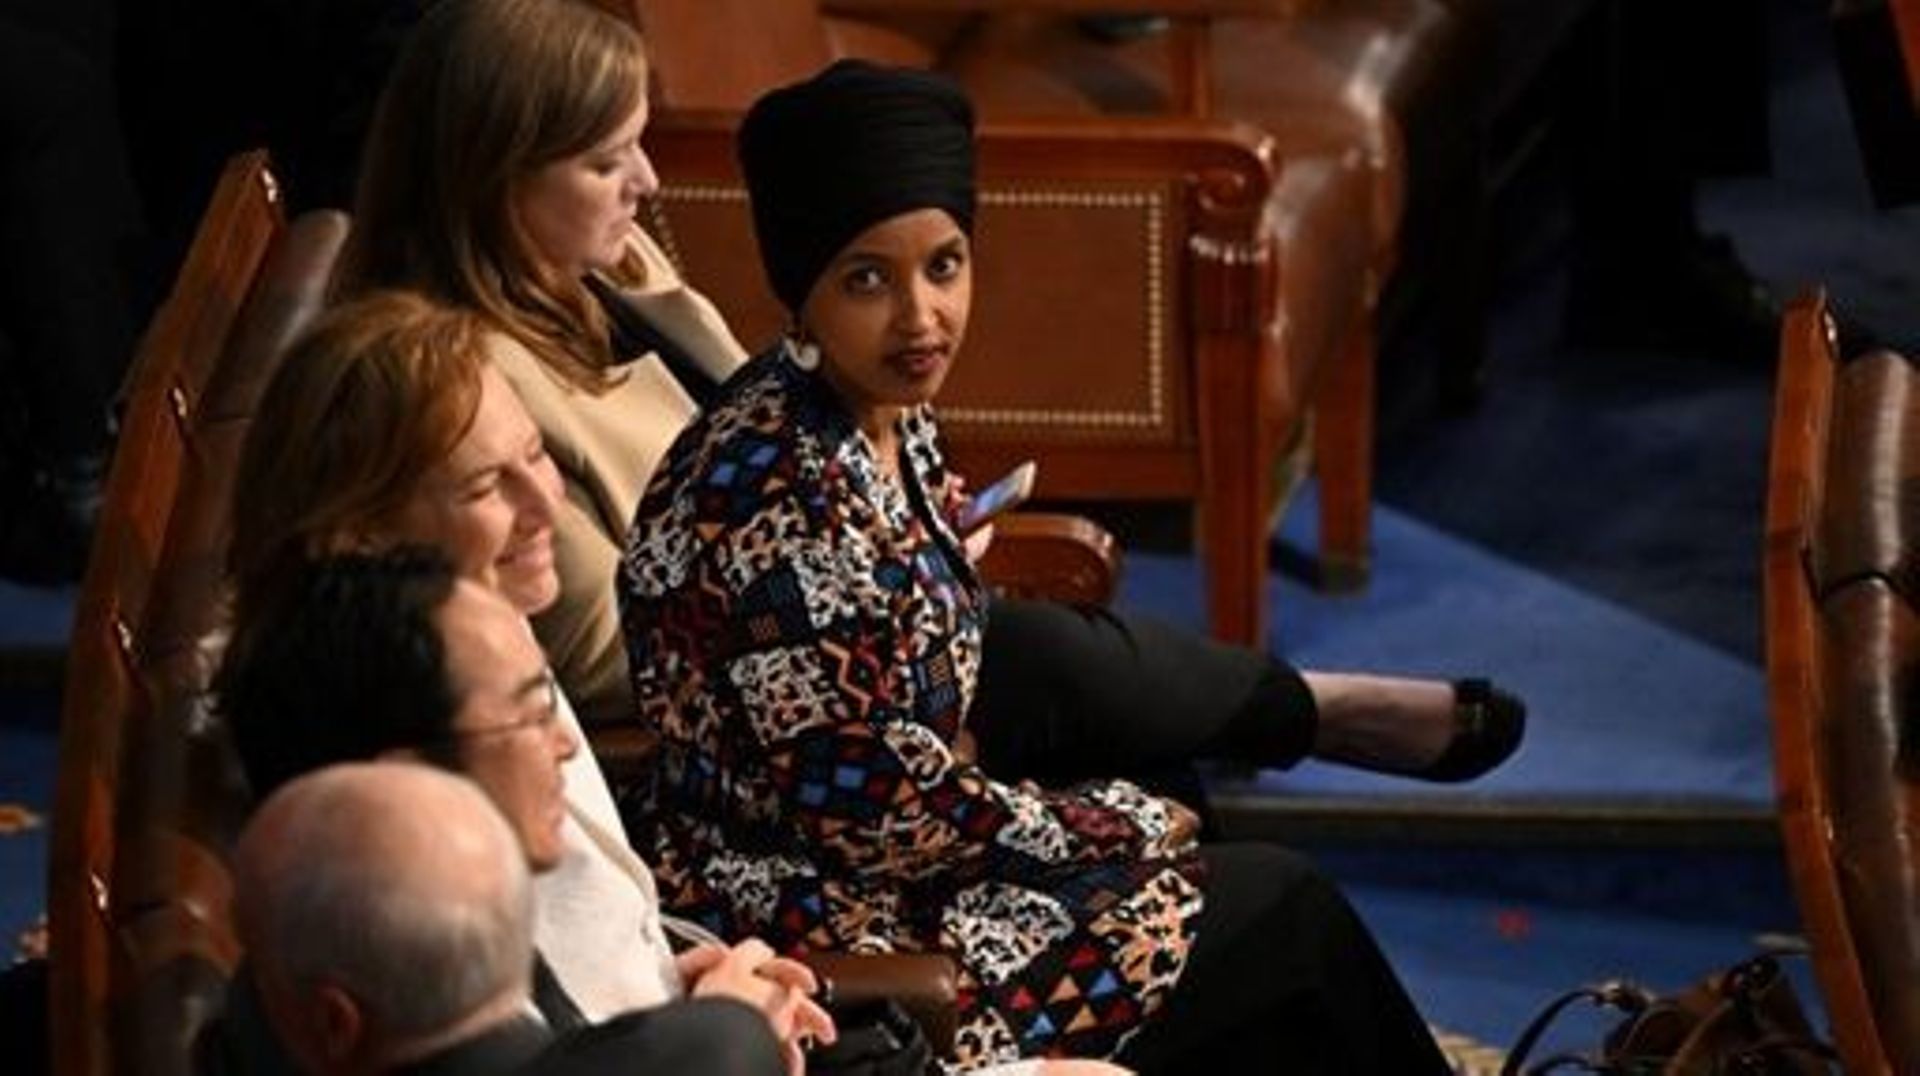 US Democratic Representative from Minnesota Ilhan Omar looks on as the US House of Representatives convenes for the 118th Congress at the US Capitol in Washington, DC, January 3, 2023. The new US Congress was thrown into chaos on its first day Tuesday as 